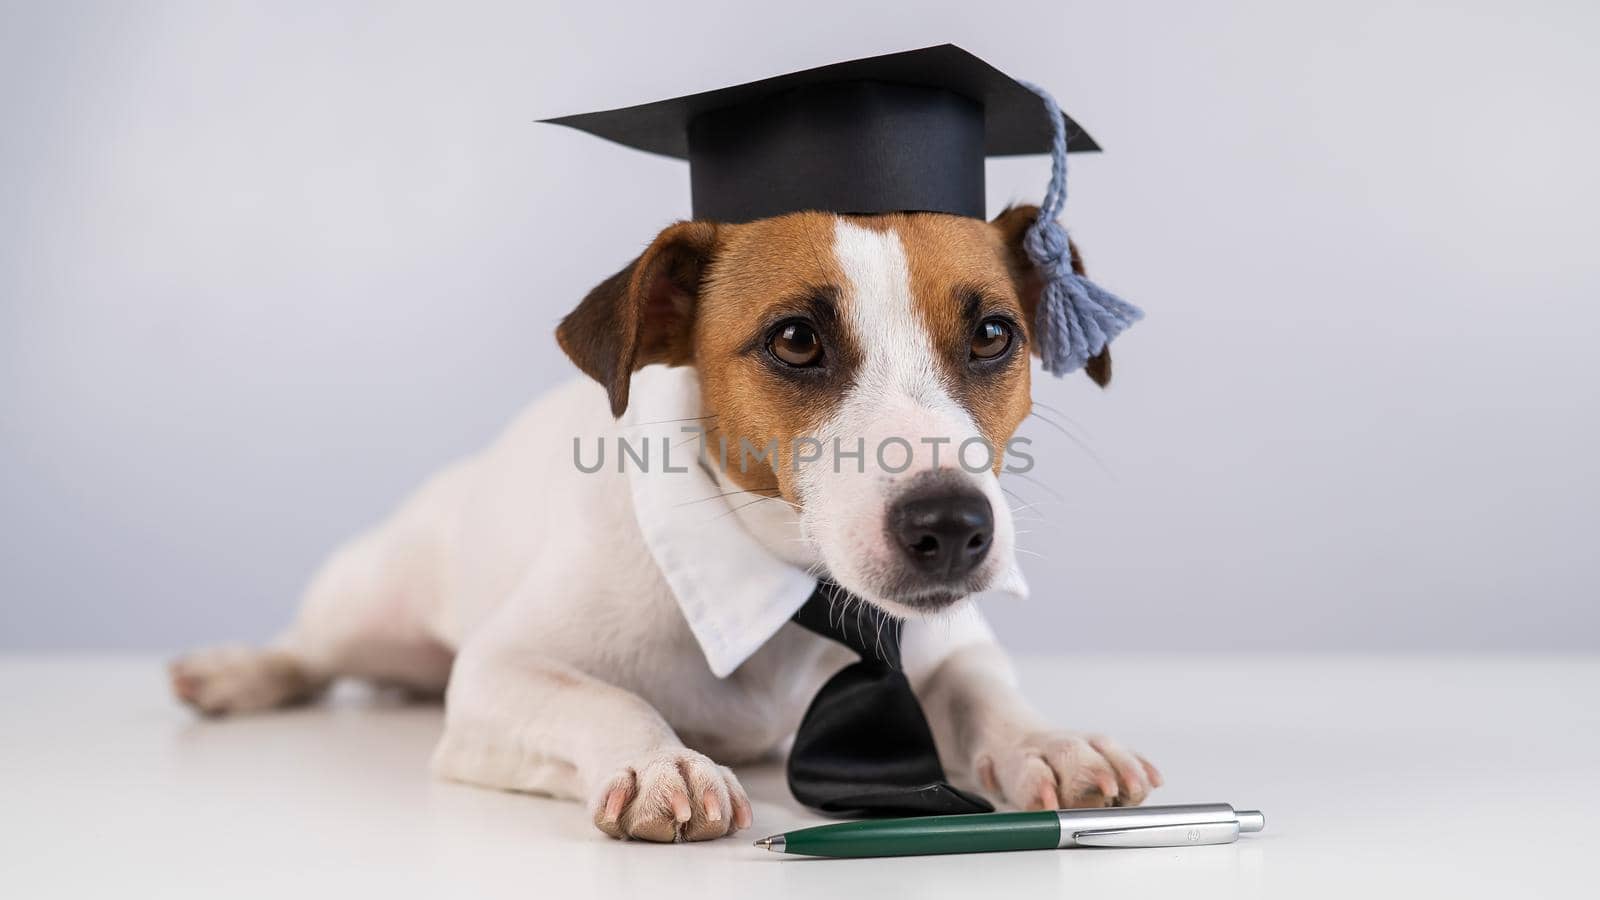 Jack Russell Terrier dog in a tie and academic cap sits on a white table. by mrwed54